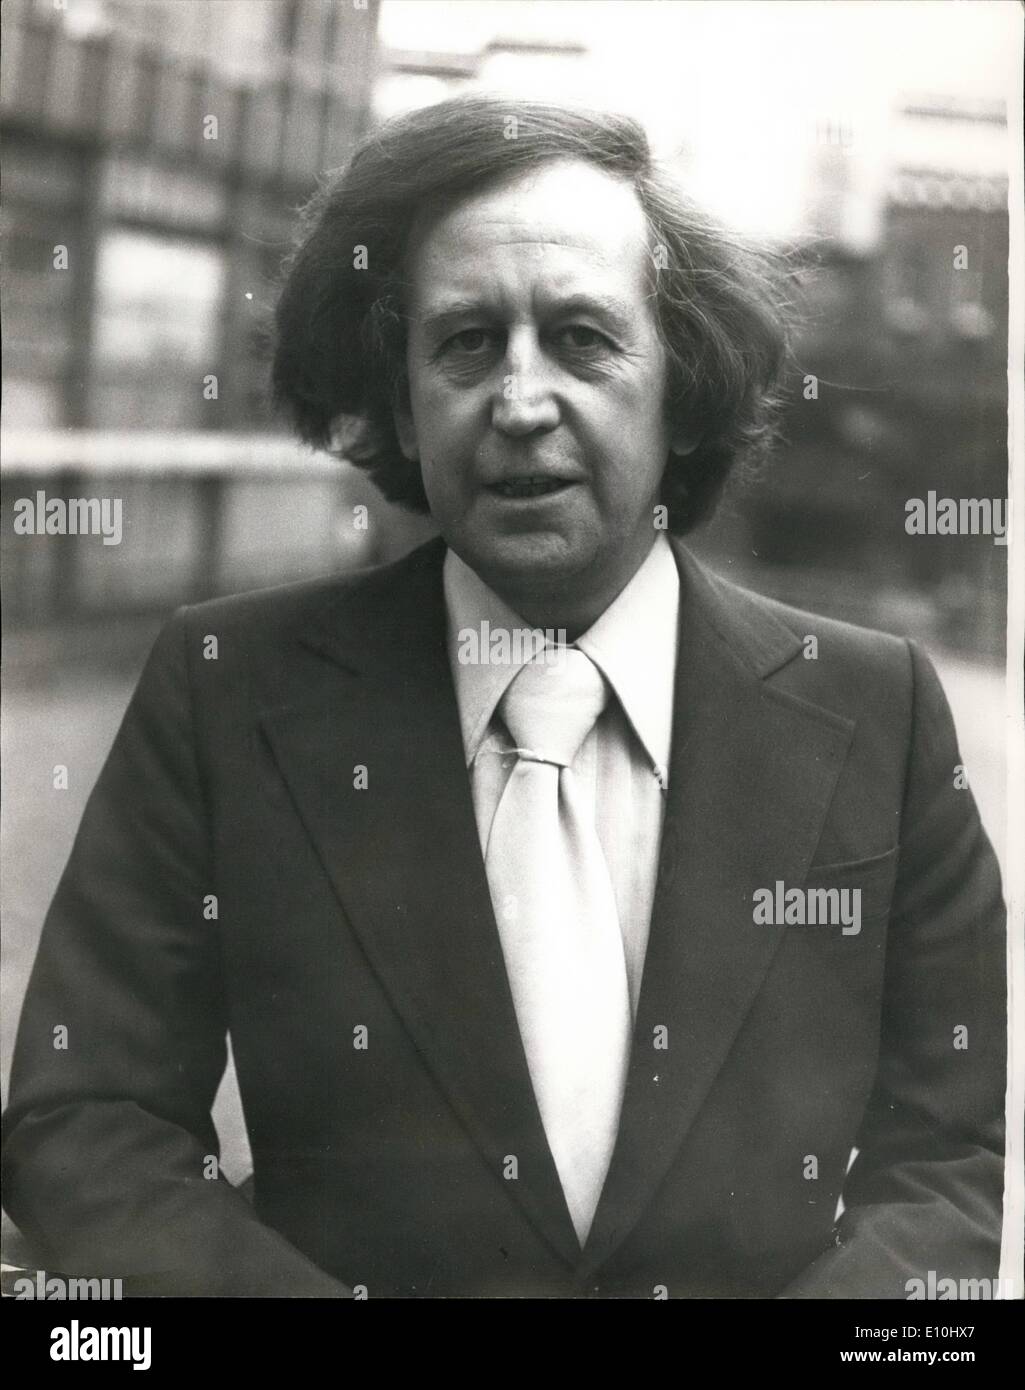 Dec. 12, 1972 - Two Men Accused Of Blackmailing Paul Raymond: Two men appeared at the Old Bailey today accused of Blackmailing Paul Raymond, the soho Strip club and theatre owner. Picture Shows: Paul Raymond pictured on his way to the Old Bailey today. Stock Photo